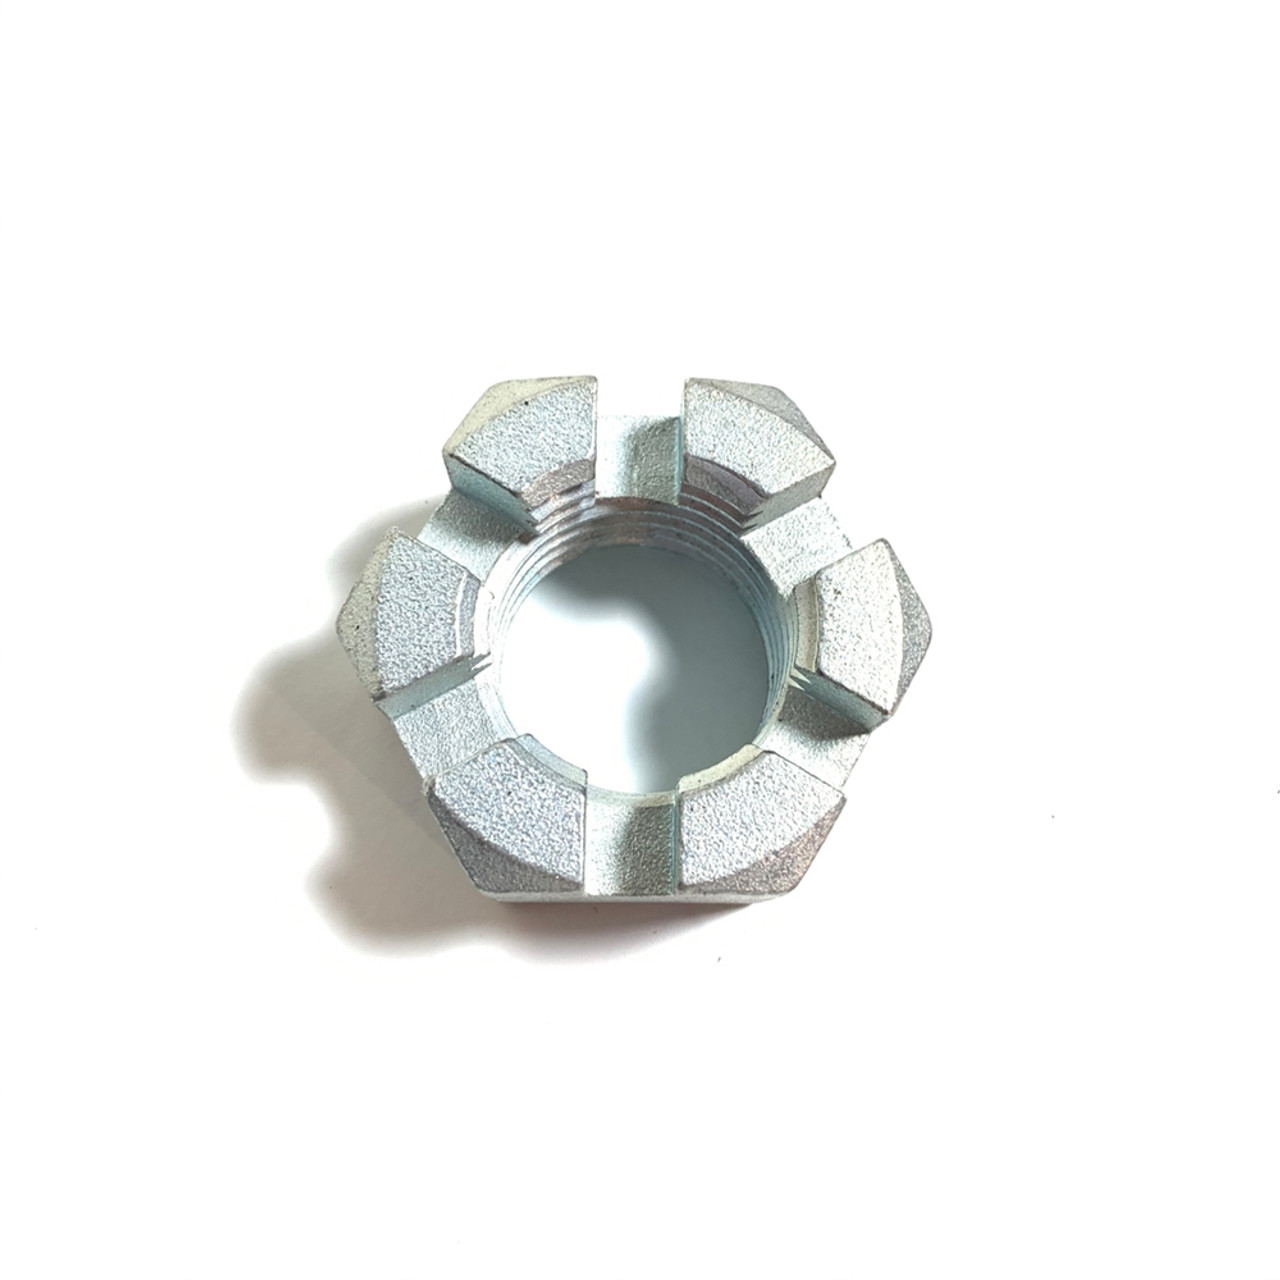 SLOTTED HEX NUT UNC PLATED 1 3/4-6